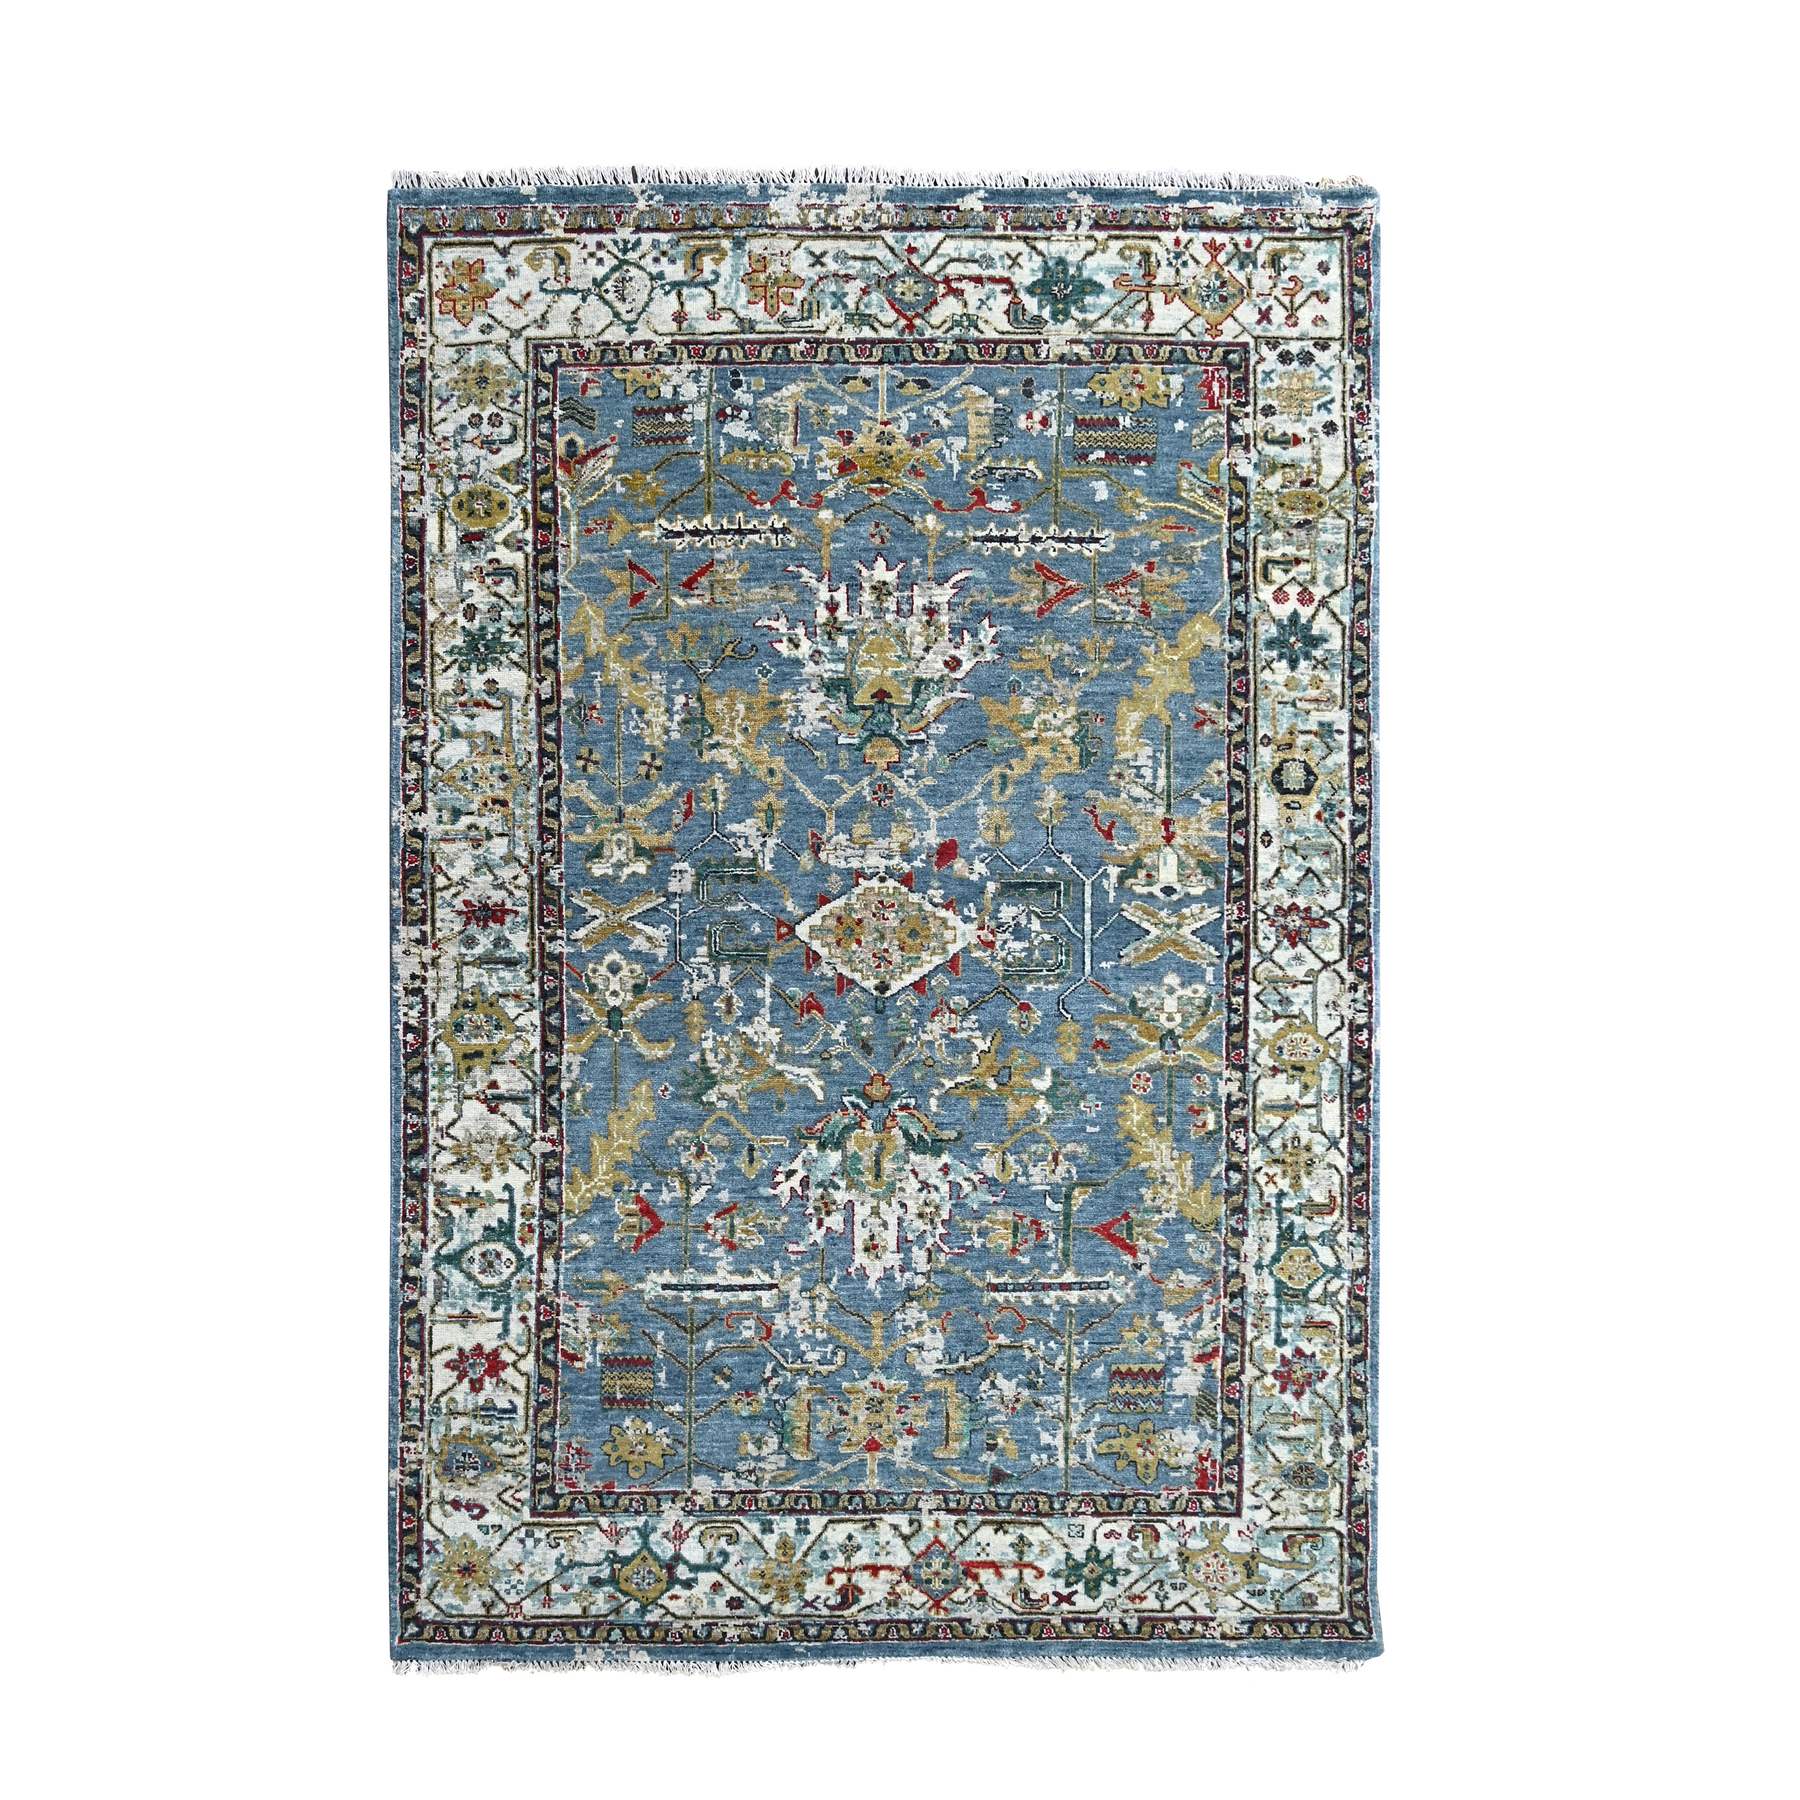 Trooper Blue, Seagull Gray Border, Hand Knotted Vibrant Wool, Densely Woven, Broken Persian Heriz Erased Design With Soft Color Palette, Oriental Rug